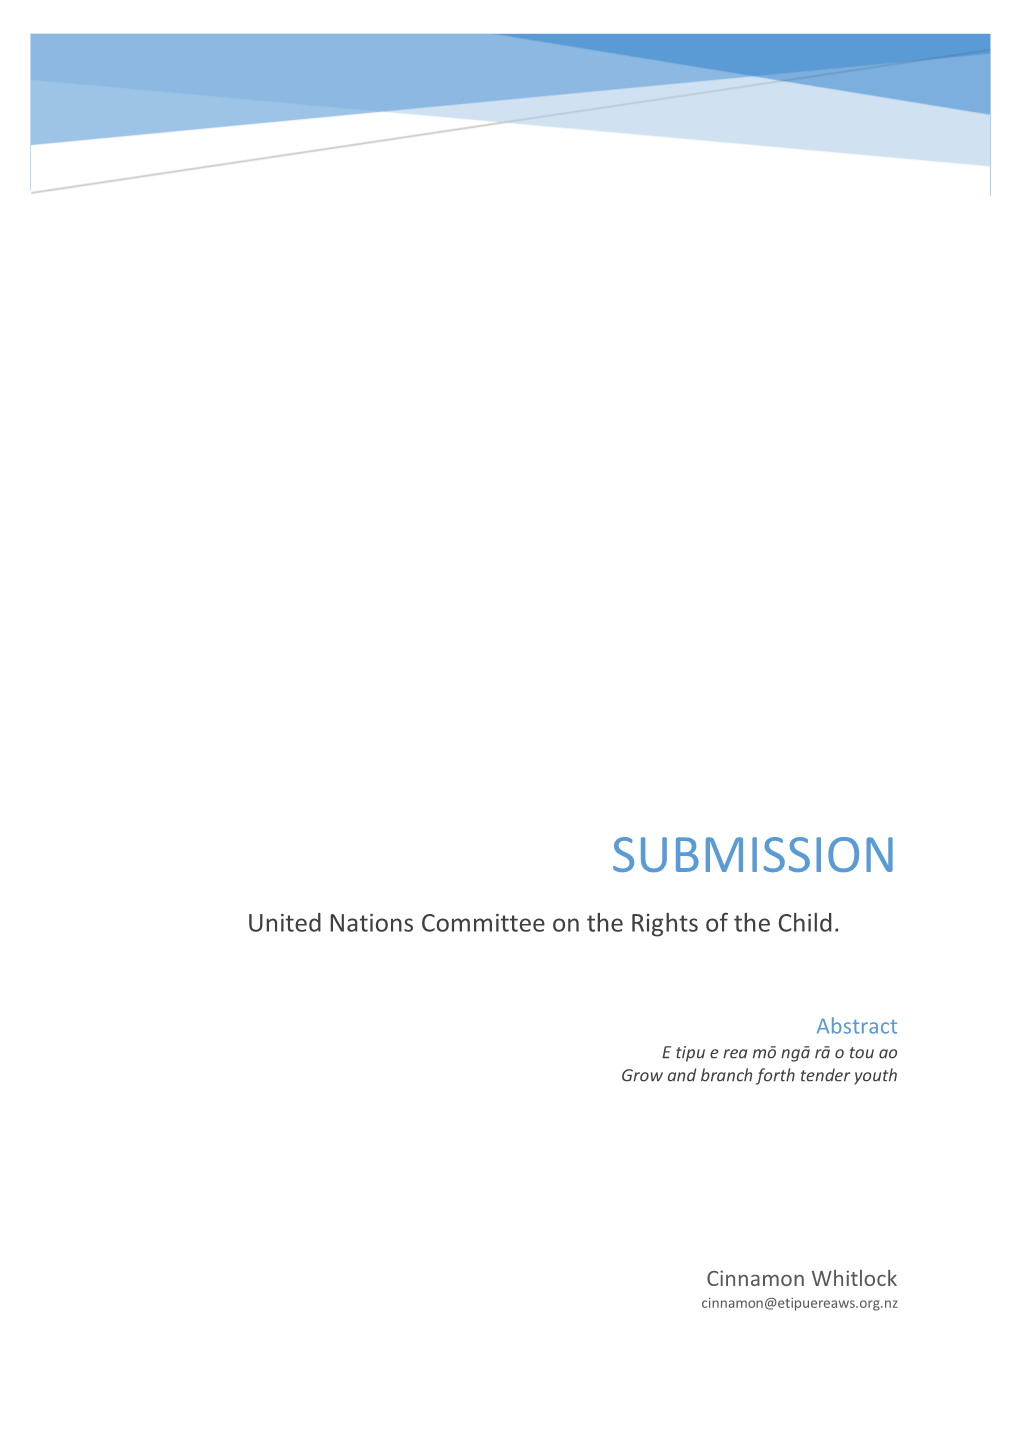 SUBMISSION United Nations Committee on the Rights of the Child